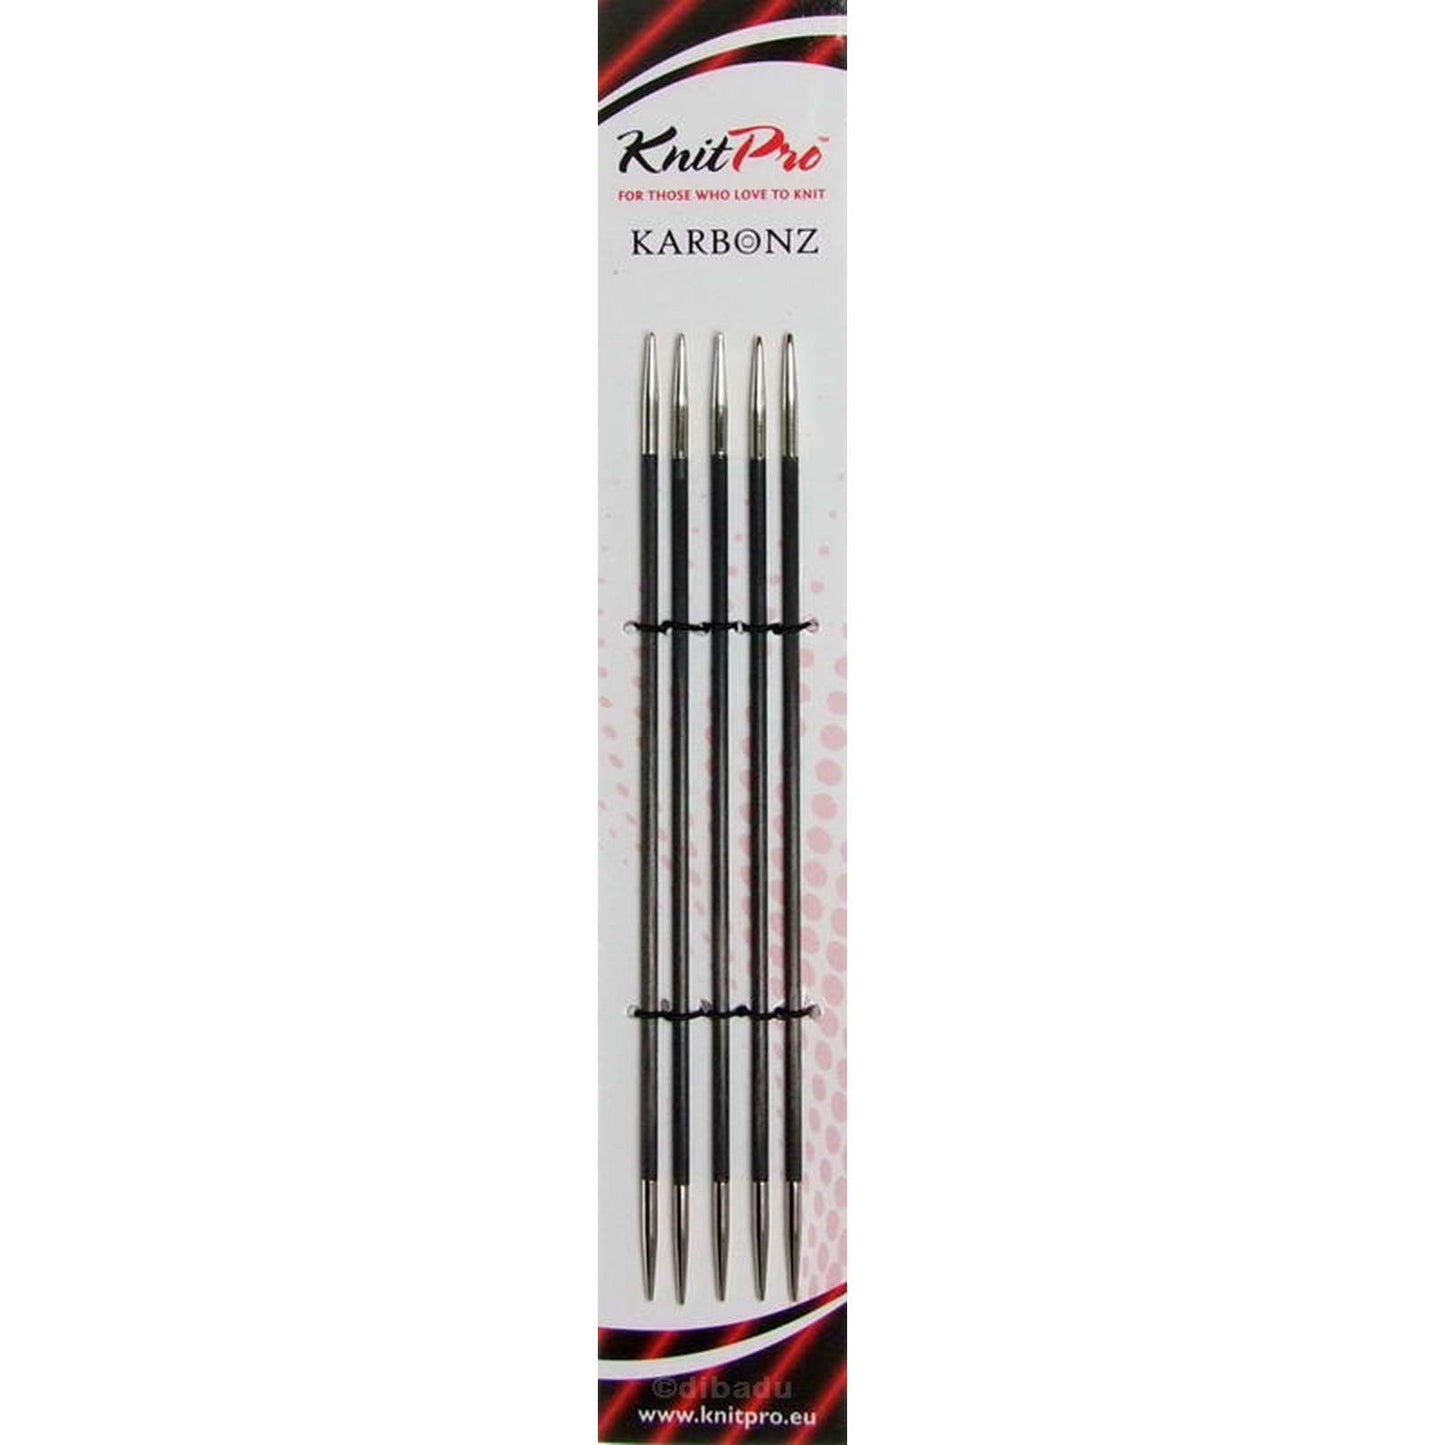 KnitPro Karbonz Double Pointed Needles - 20cm